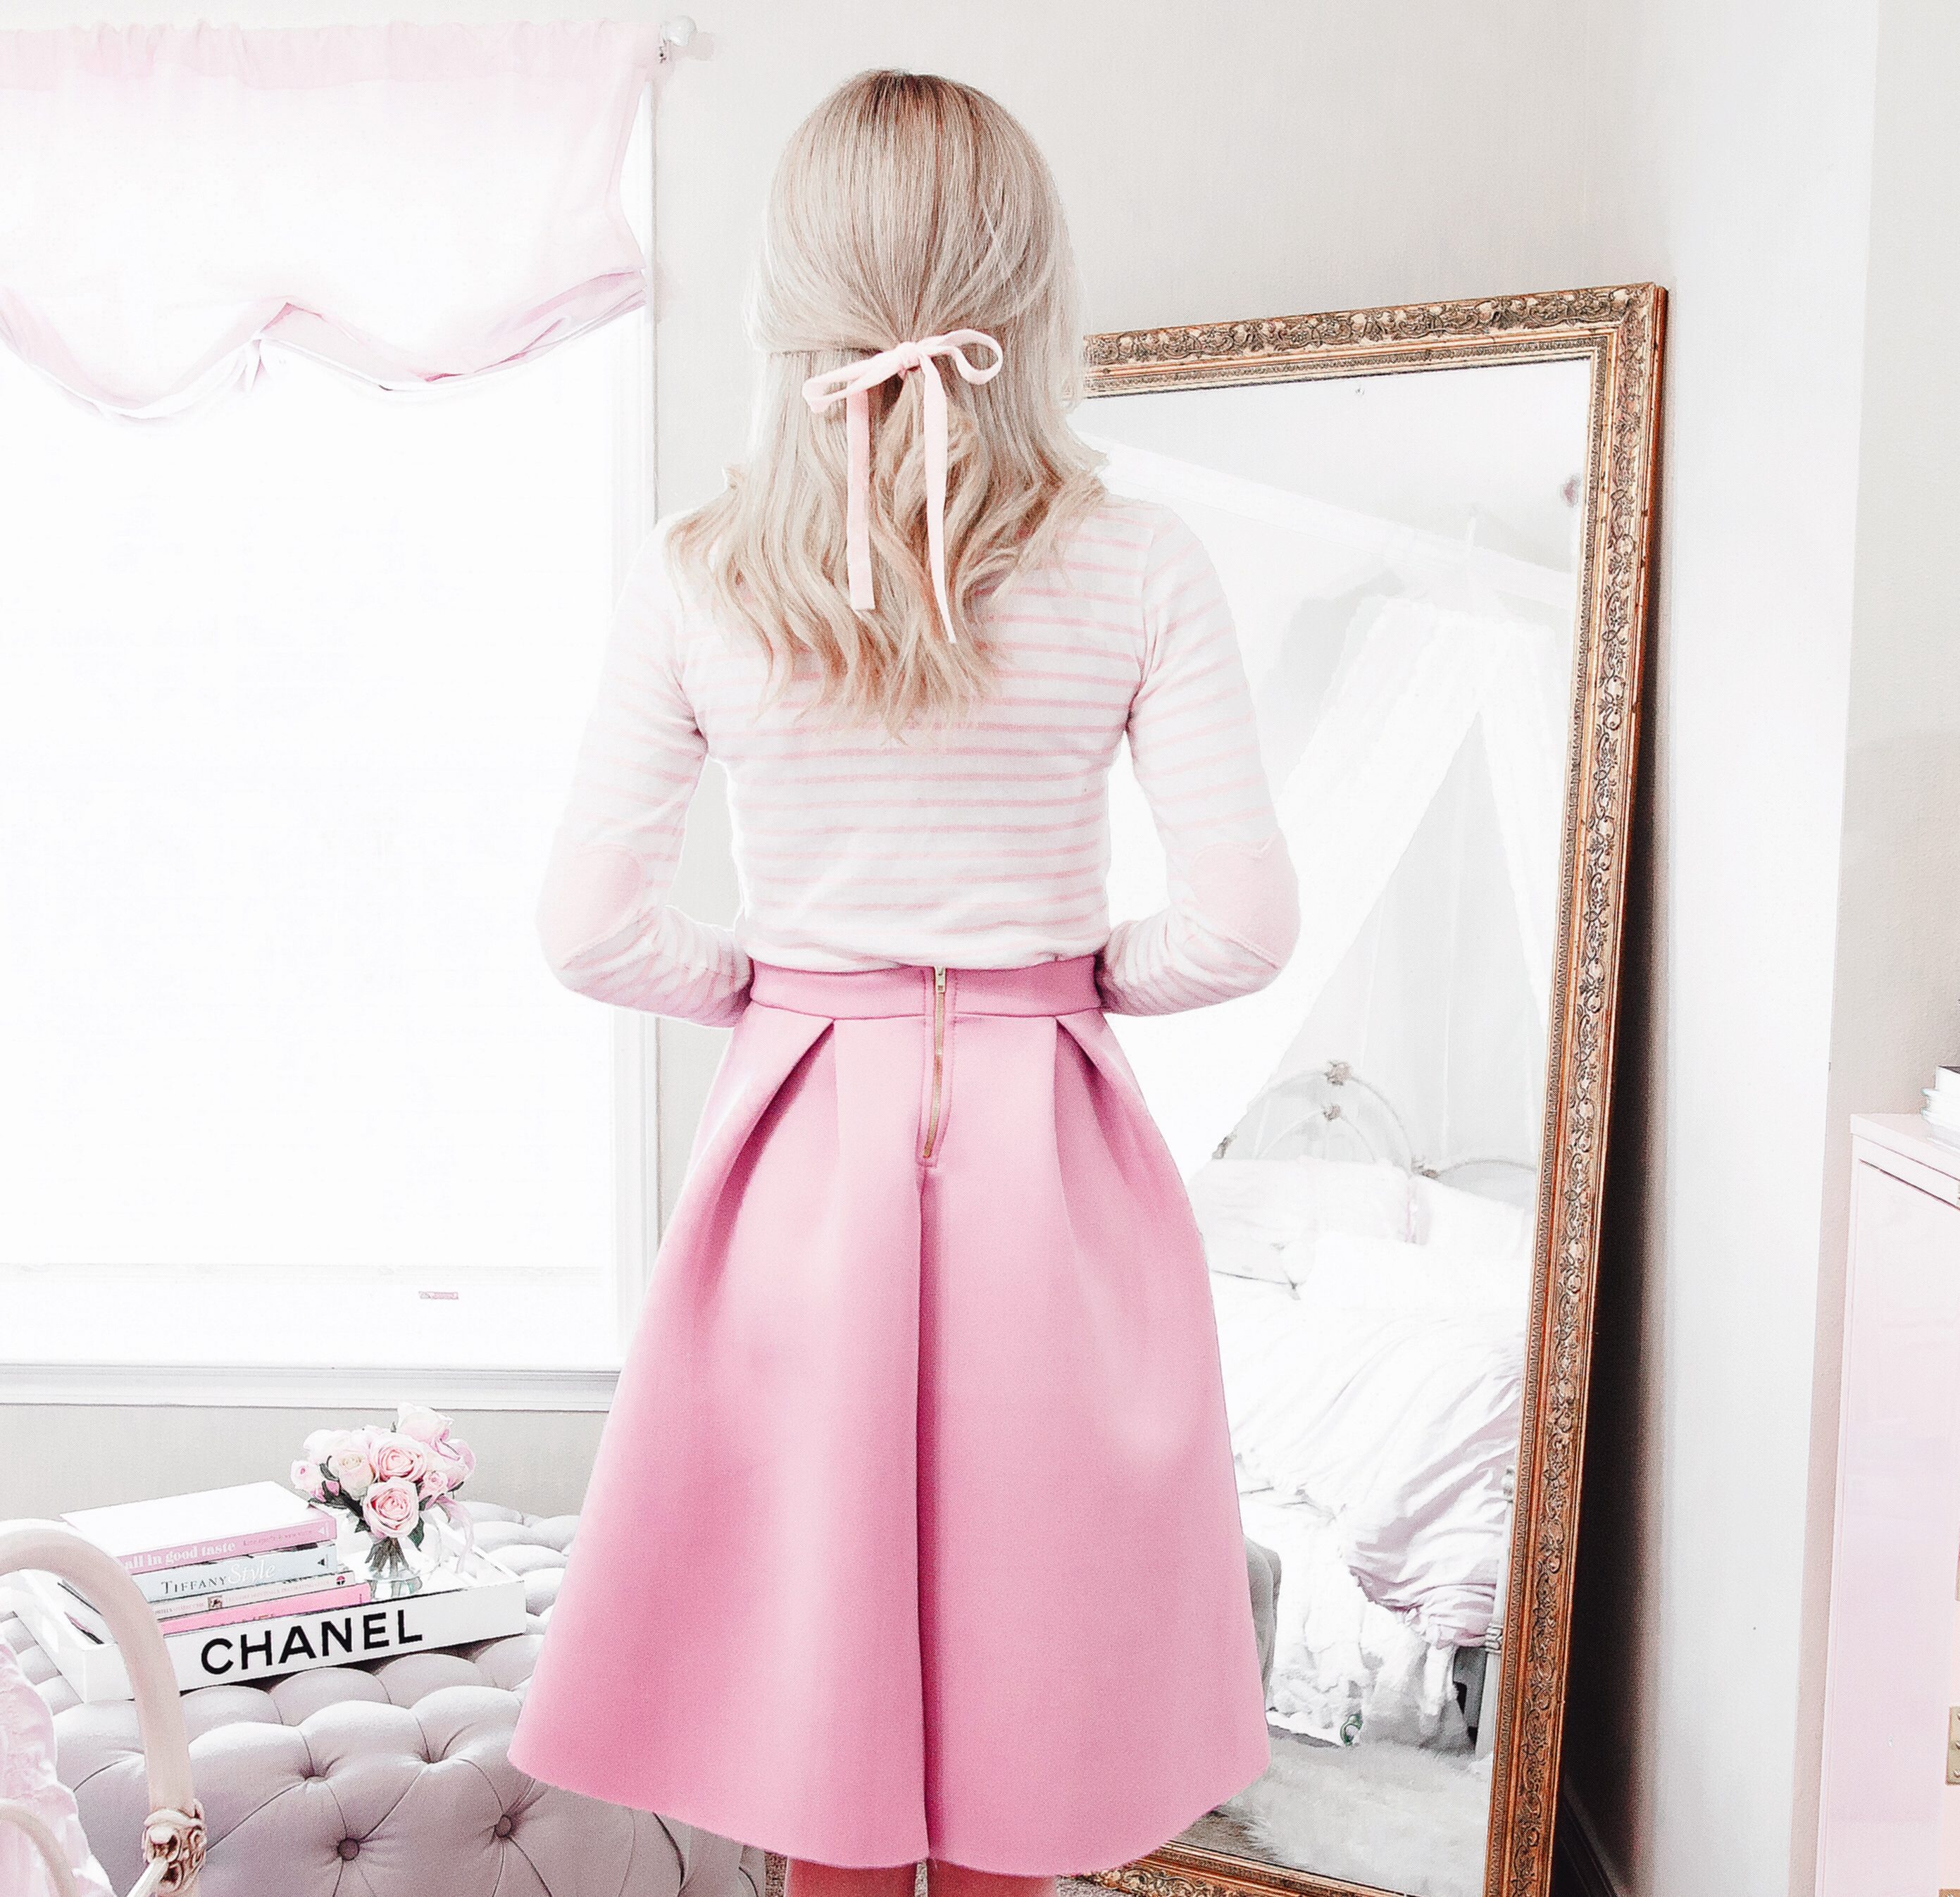 girly girl stuff – Page 5 – J'adore Lexie Couture